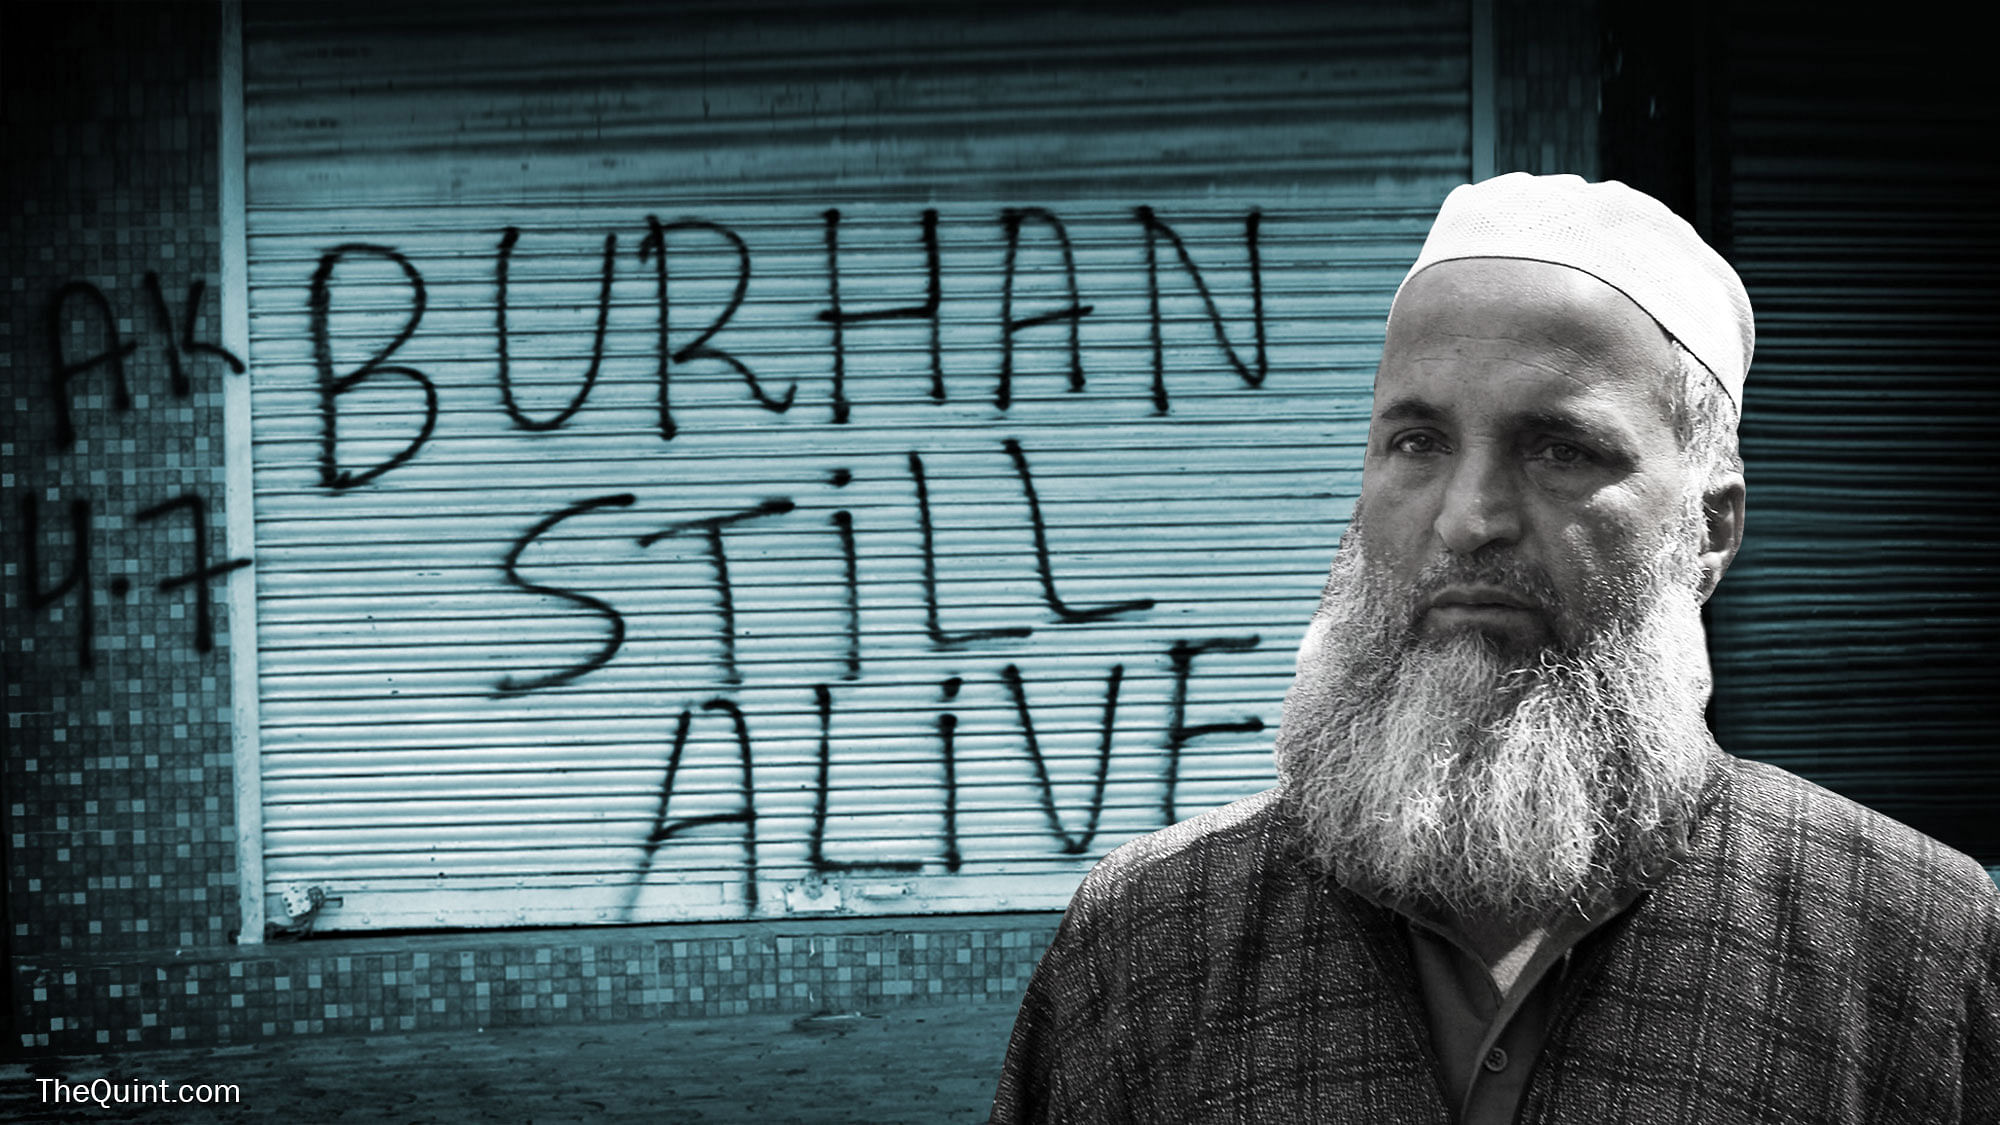 Muzaffar Ahmad Wani, Burhan’s father tells The Quint, if the forces had nabbed his son alive, the Kashmir unrest could have been averted. (Photo: <b>The Quint</b>)